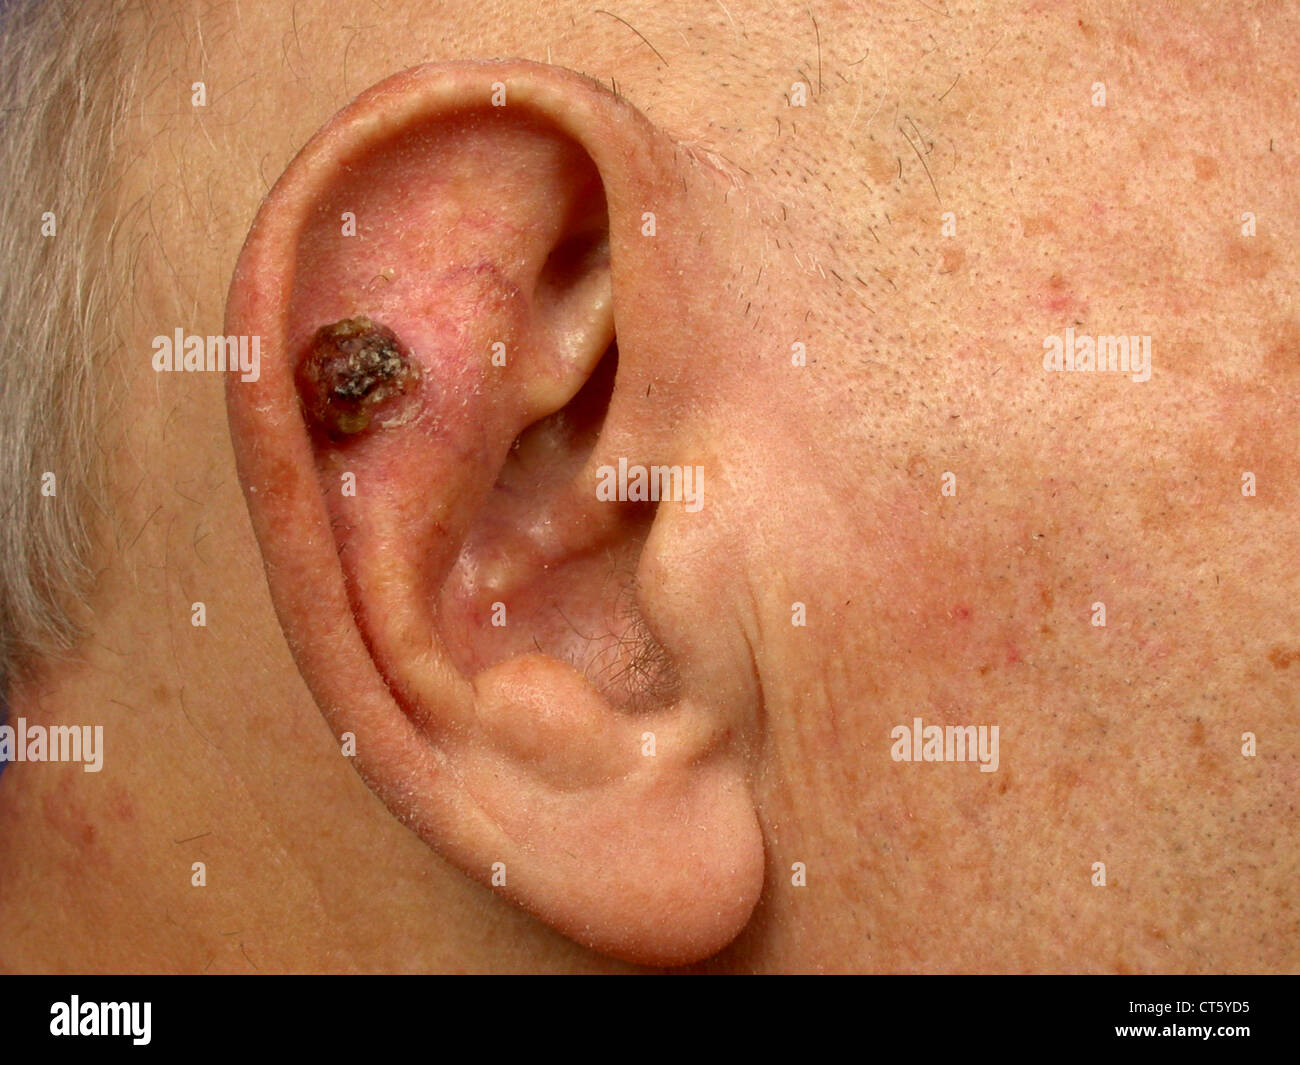 Squamous Cell Carcinoma Ear Hi Res Stock Photography And Images Alamy